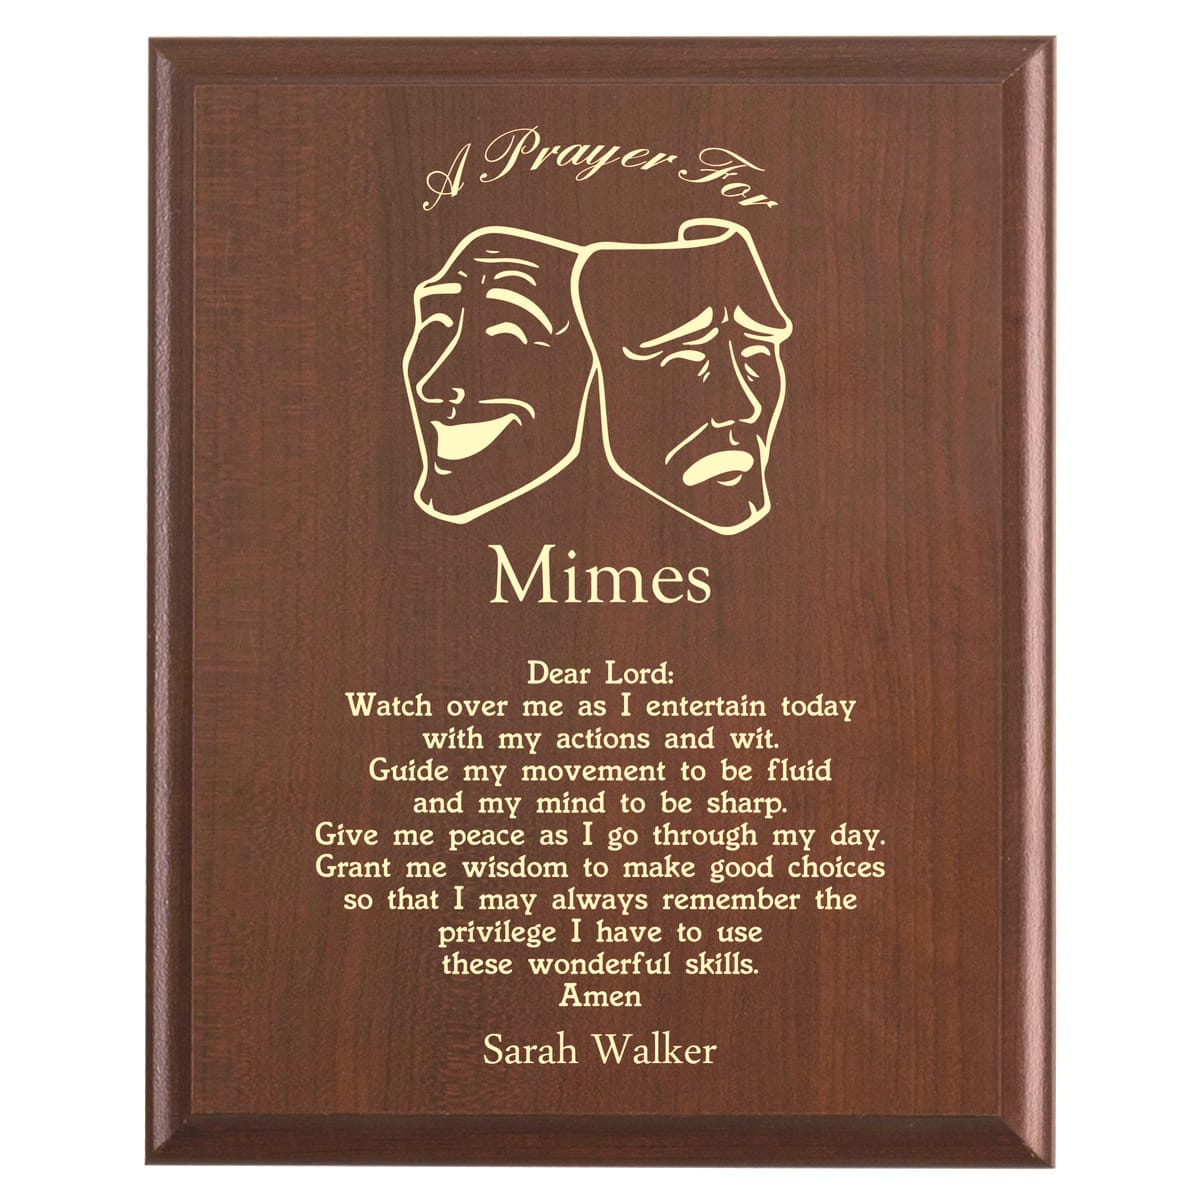 Plaque photo: Mime Prayer Plaque design with free personalization. Wood style finish with customized text.